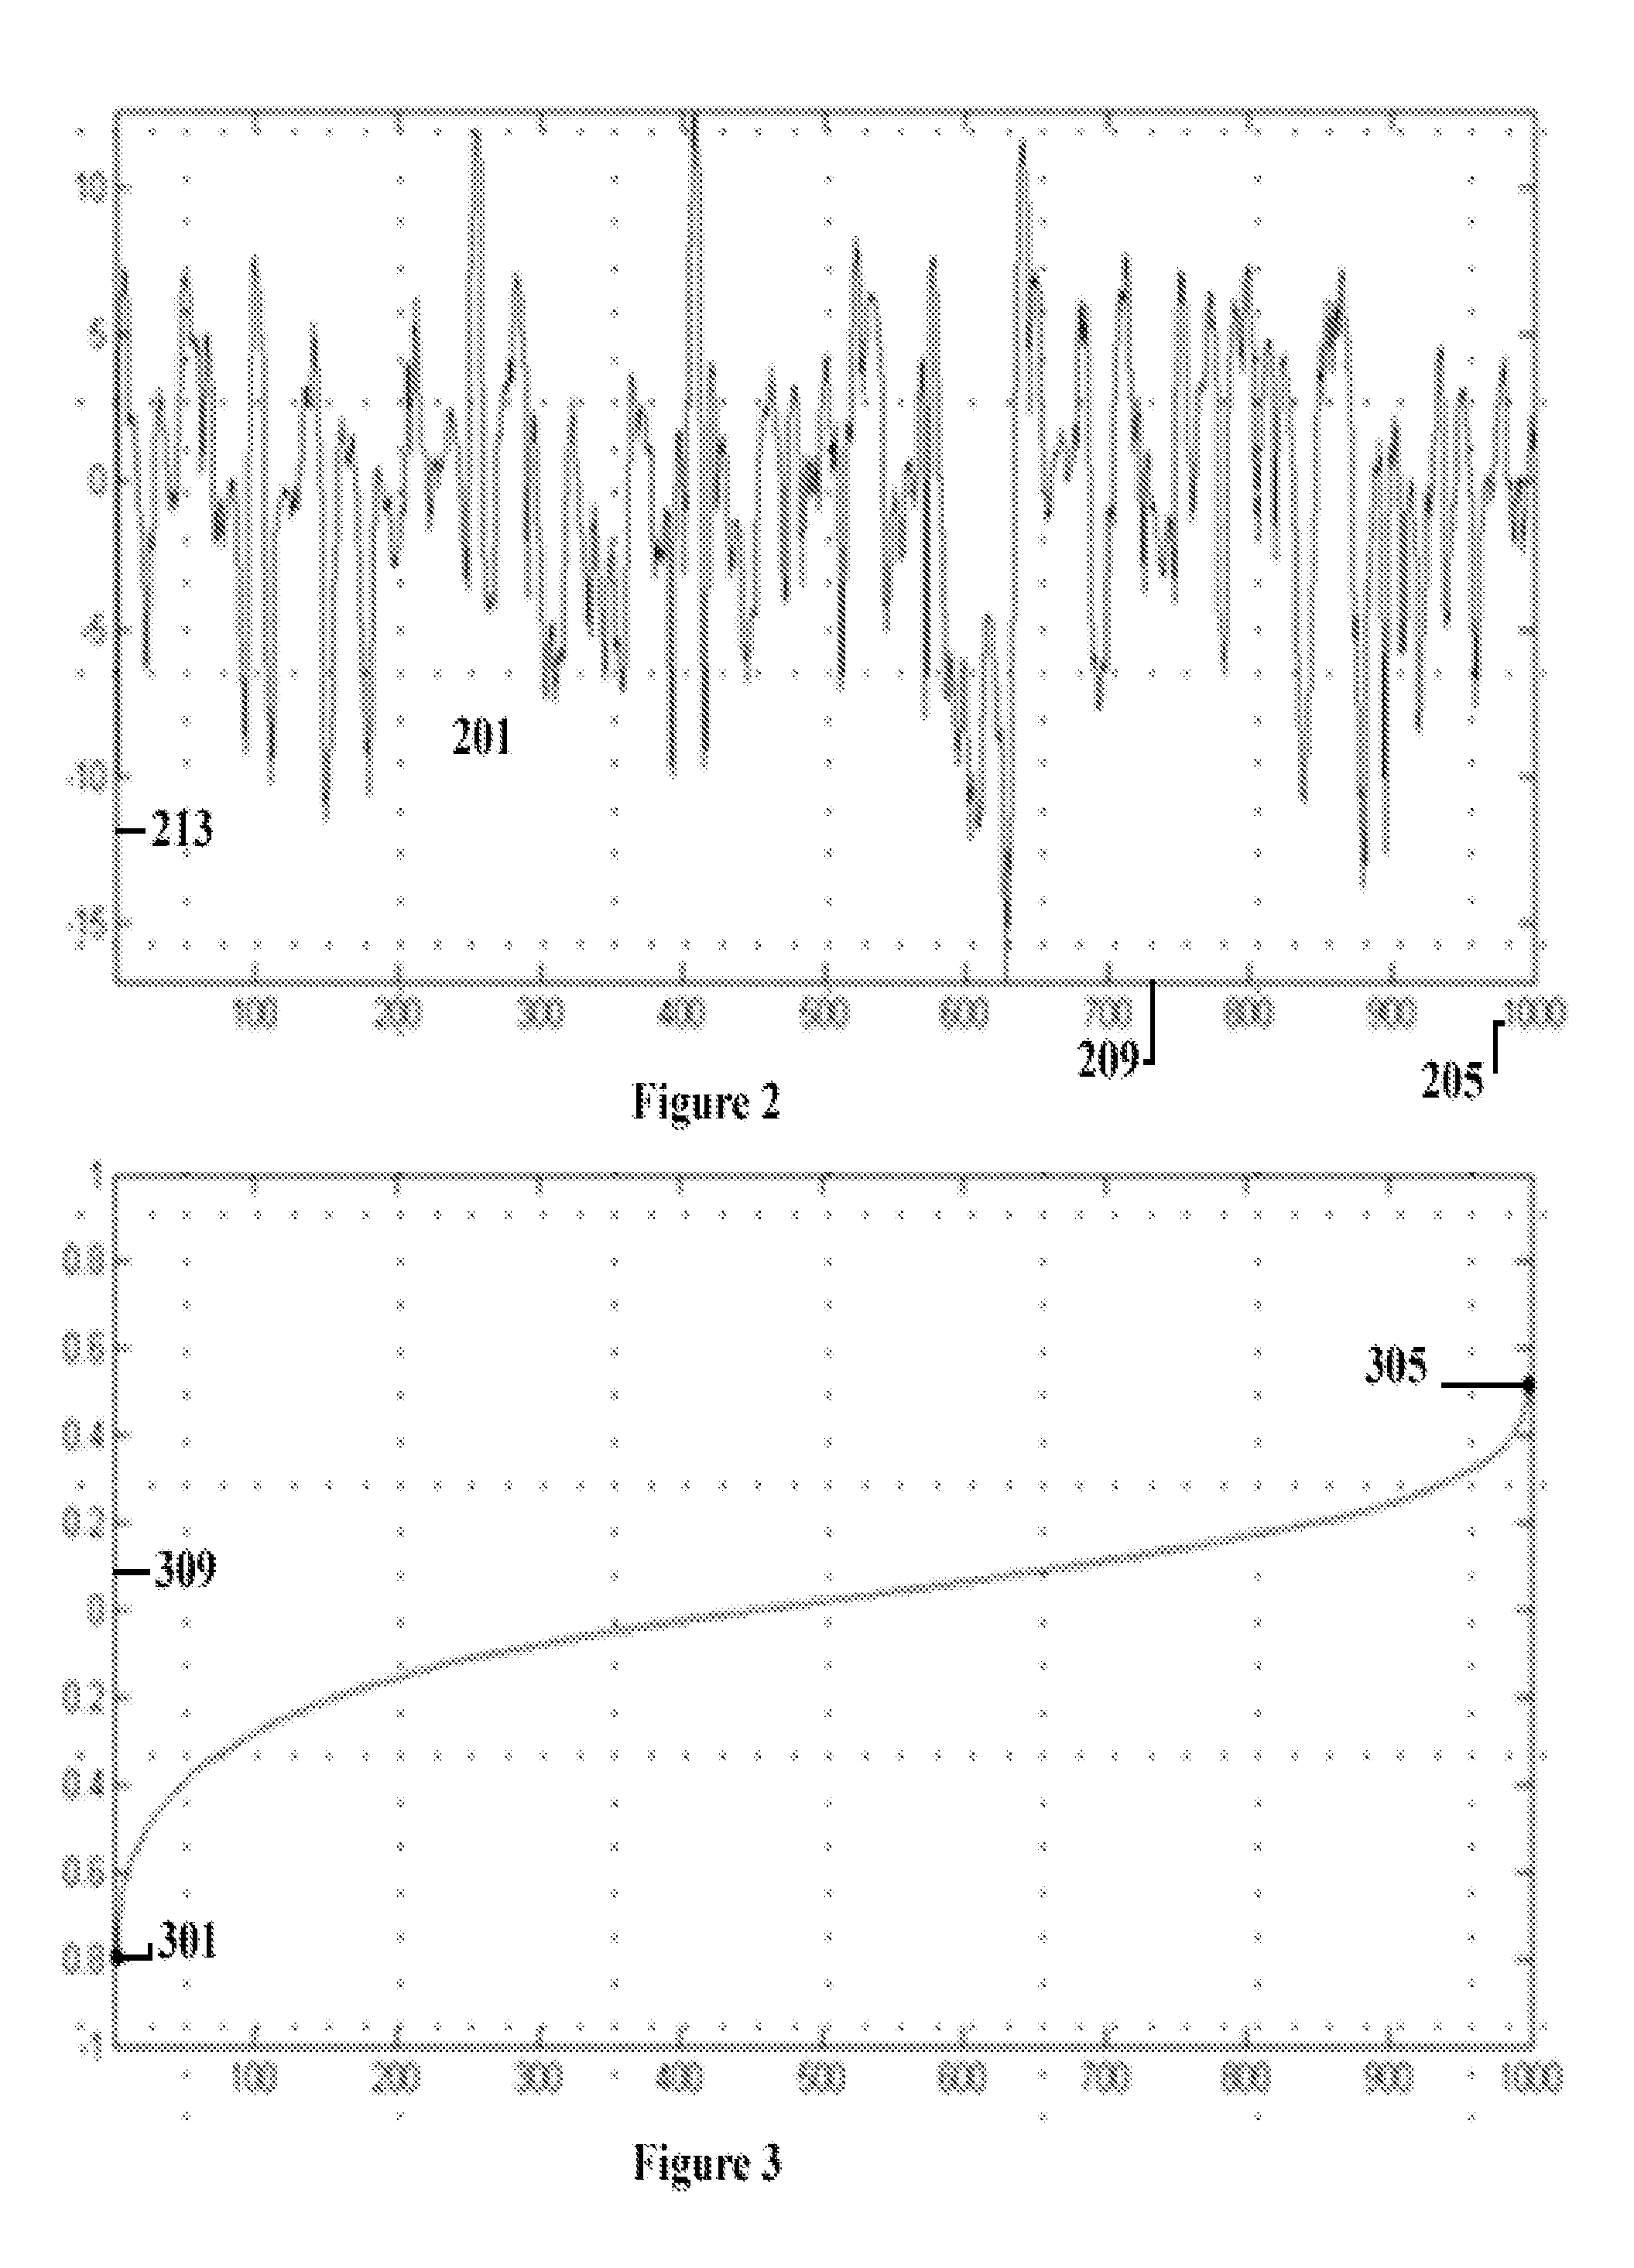 System and Method for Recognizing Emotional State from a Speech Signal